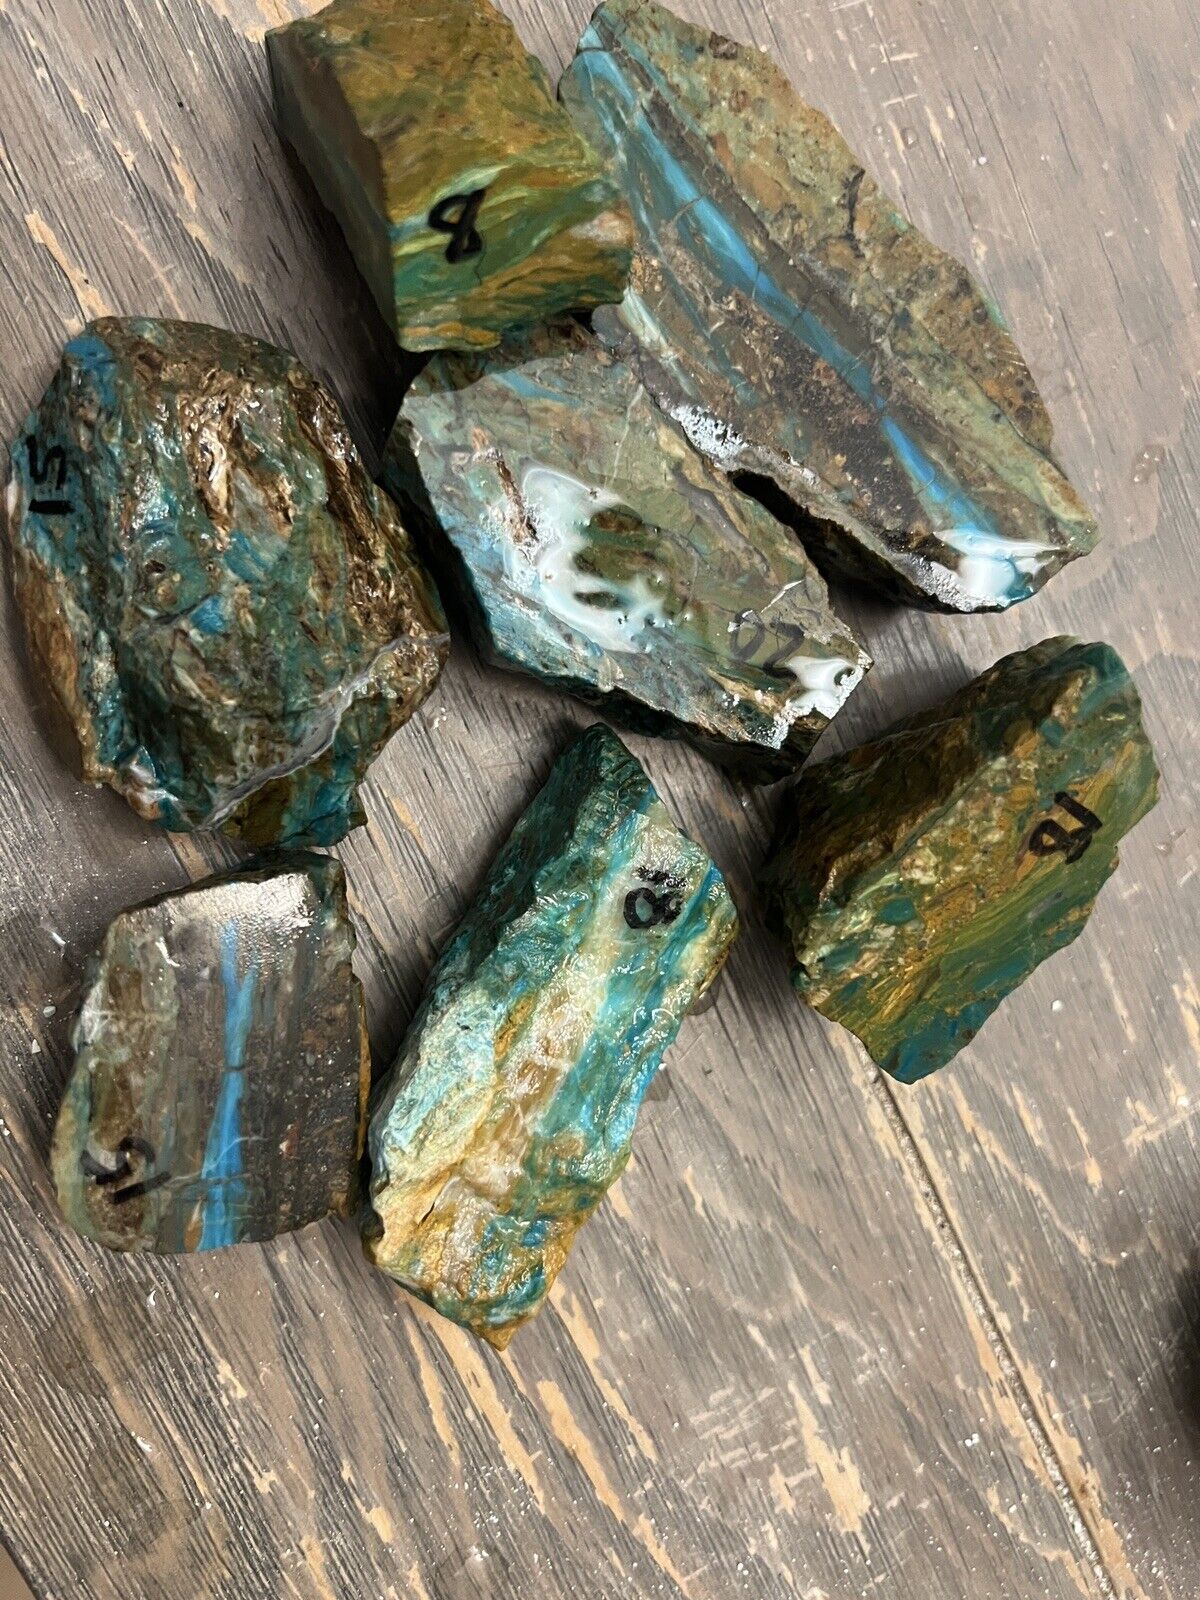 1 pound Malachite, azurite, chrysocolla rough faced nice LOTS of color